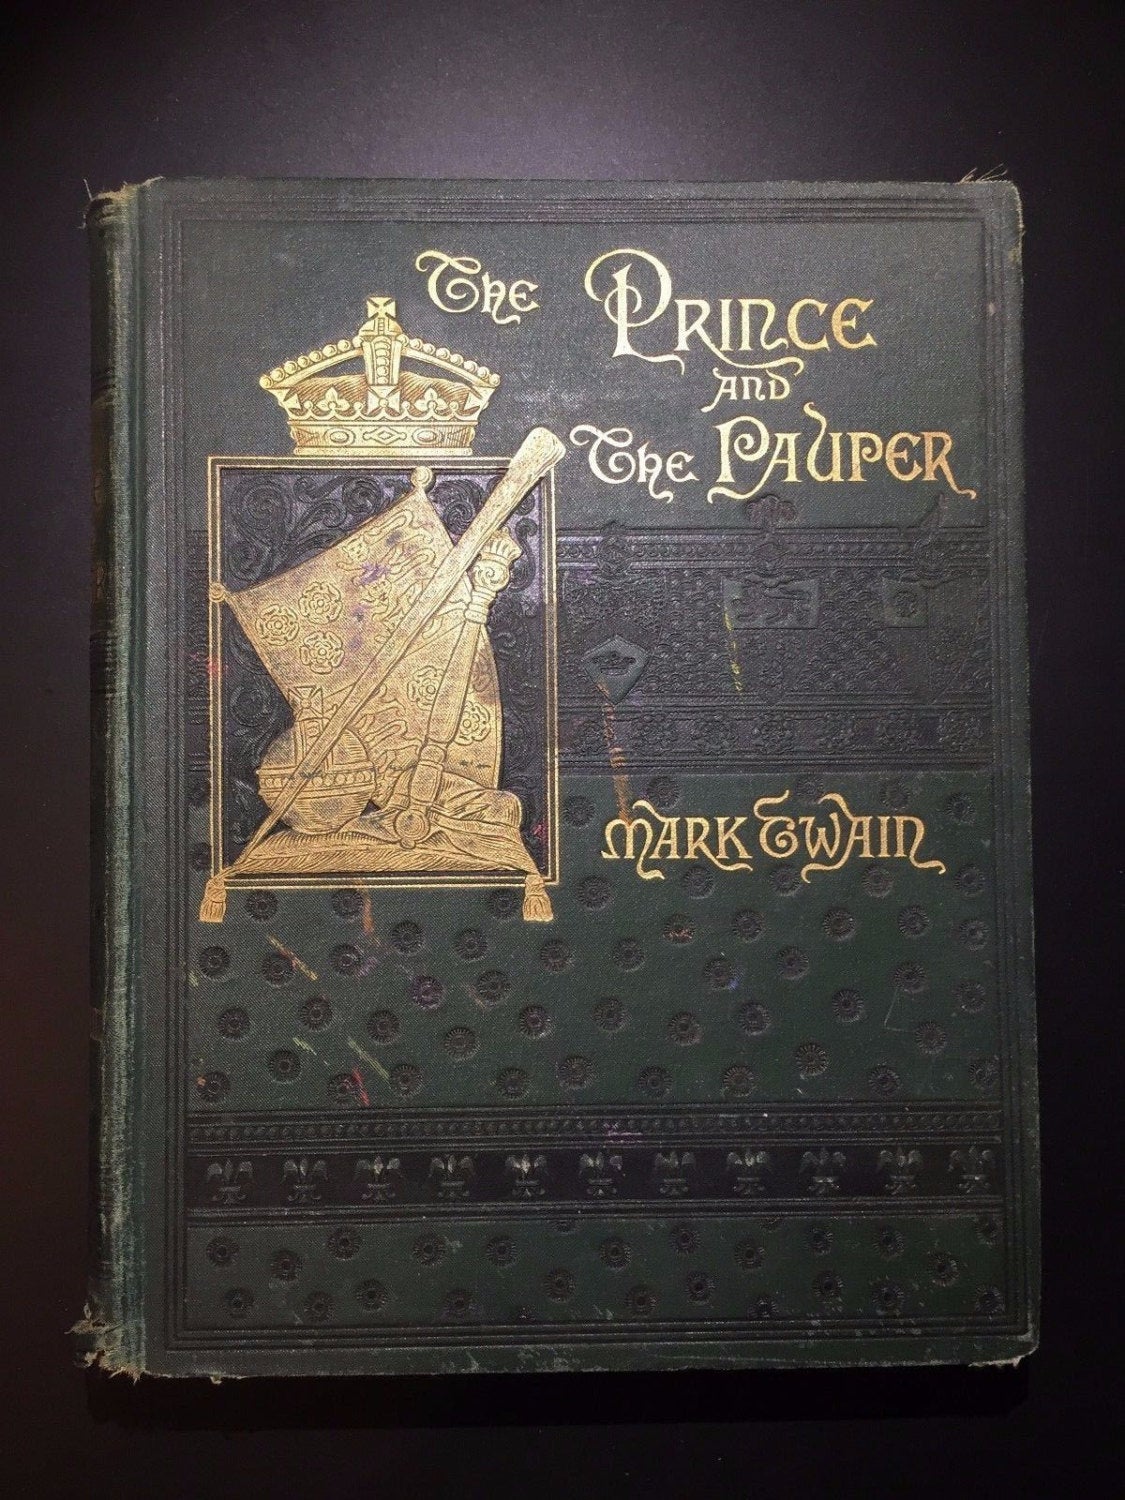 The Prince and the Pauper, Mark Twain, 1889, Illustrated, Victorian Binding